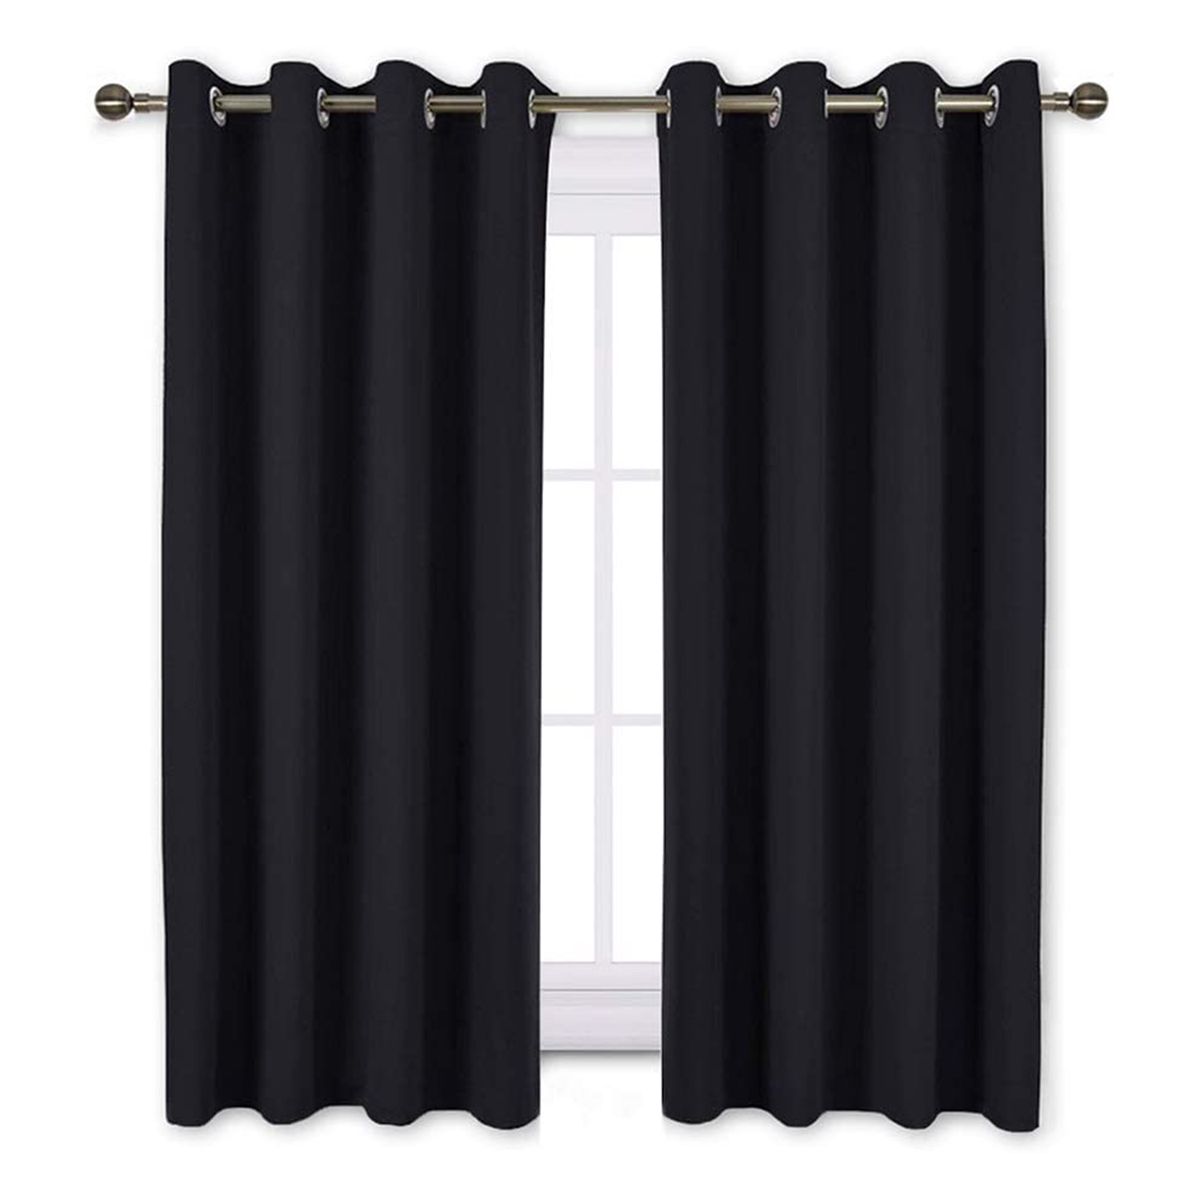 Amazon’s Nicetown Blackout Curtains Are on Sale | Travel + Leisure